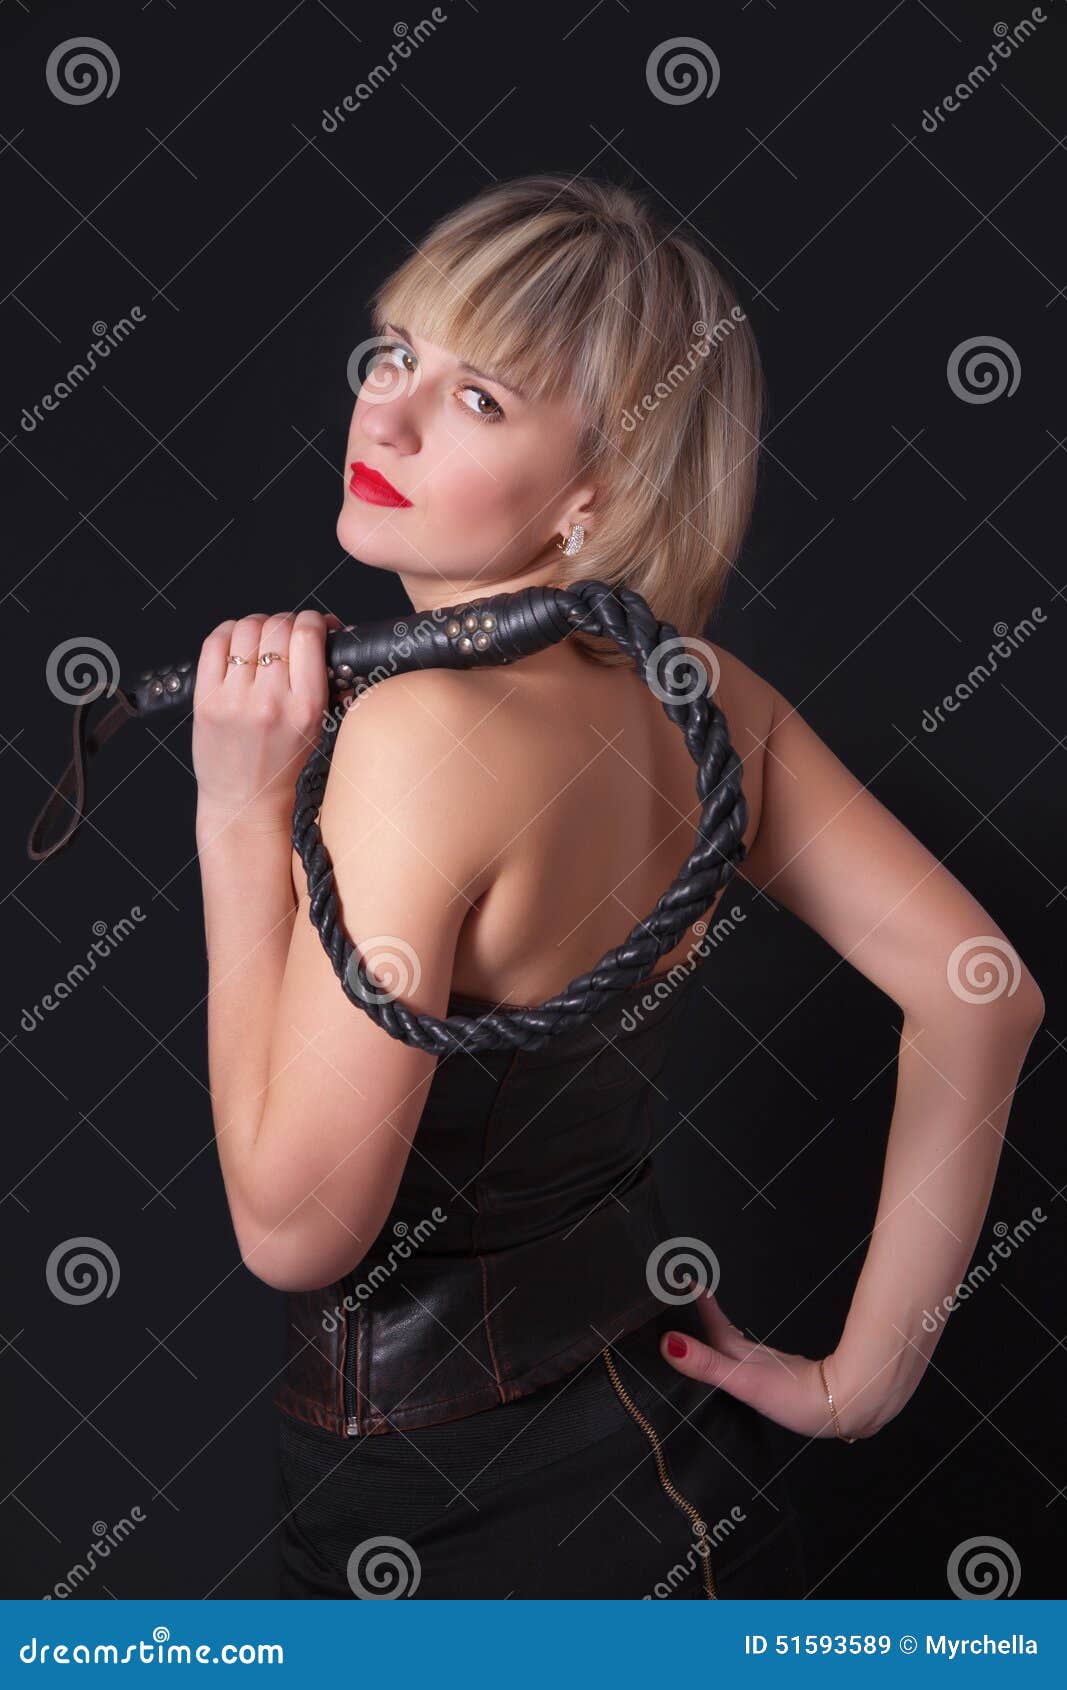 https://thumbs.dreamstime.com/z/woman-whip-her-hand-black-background-51593589.jpg